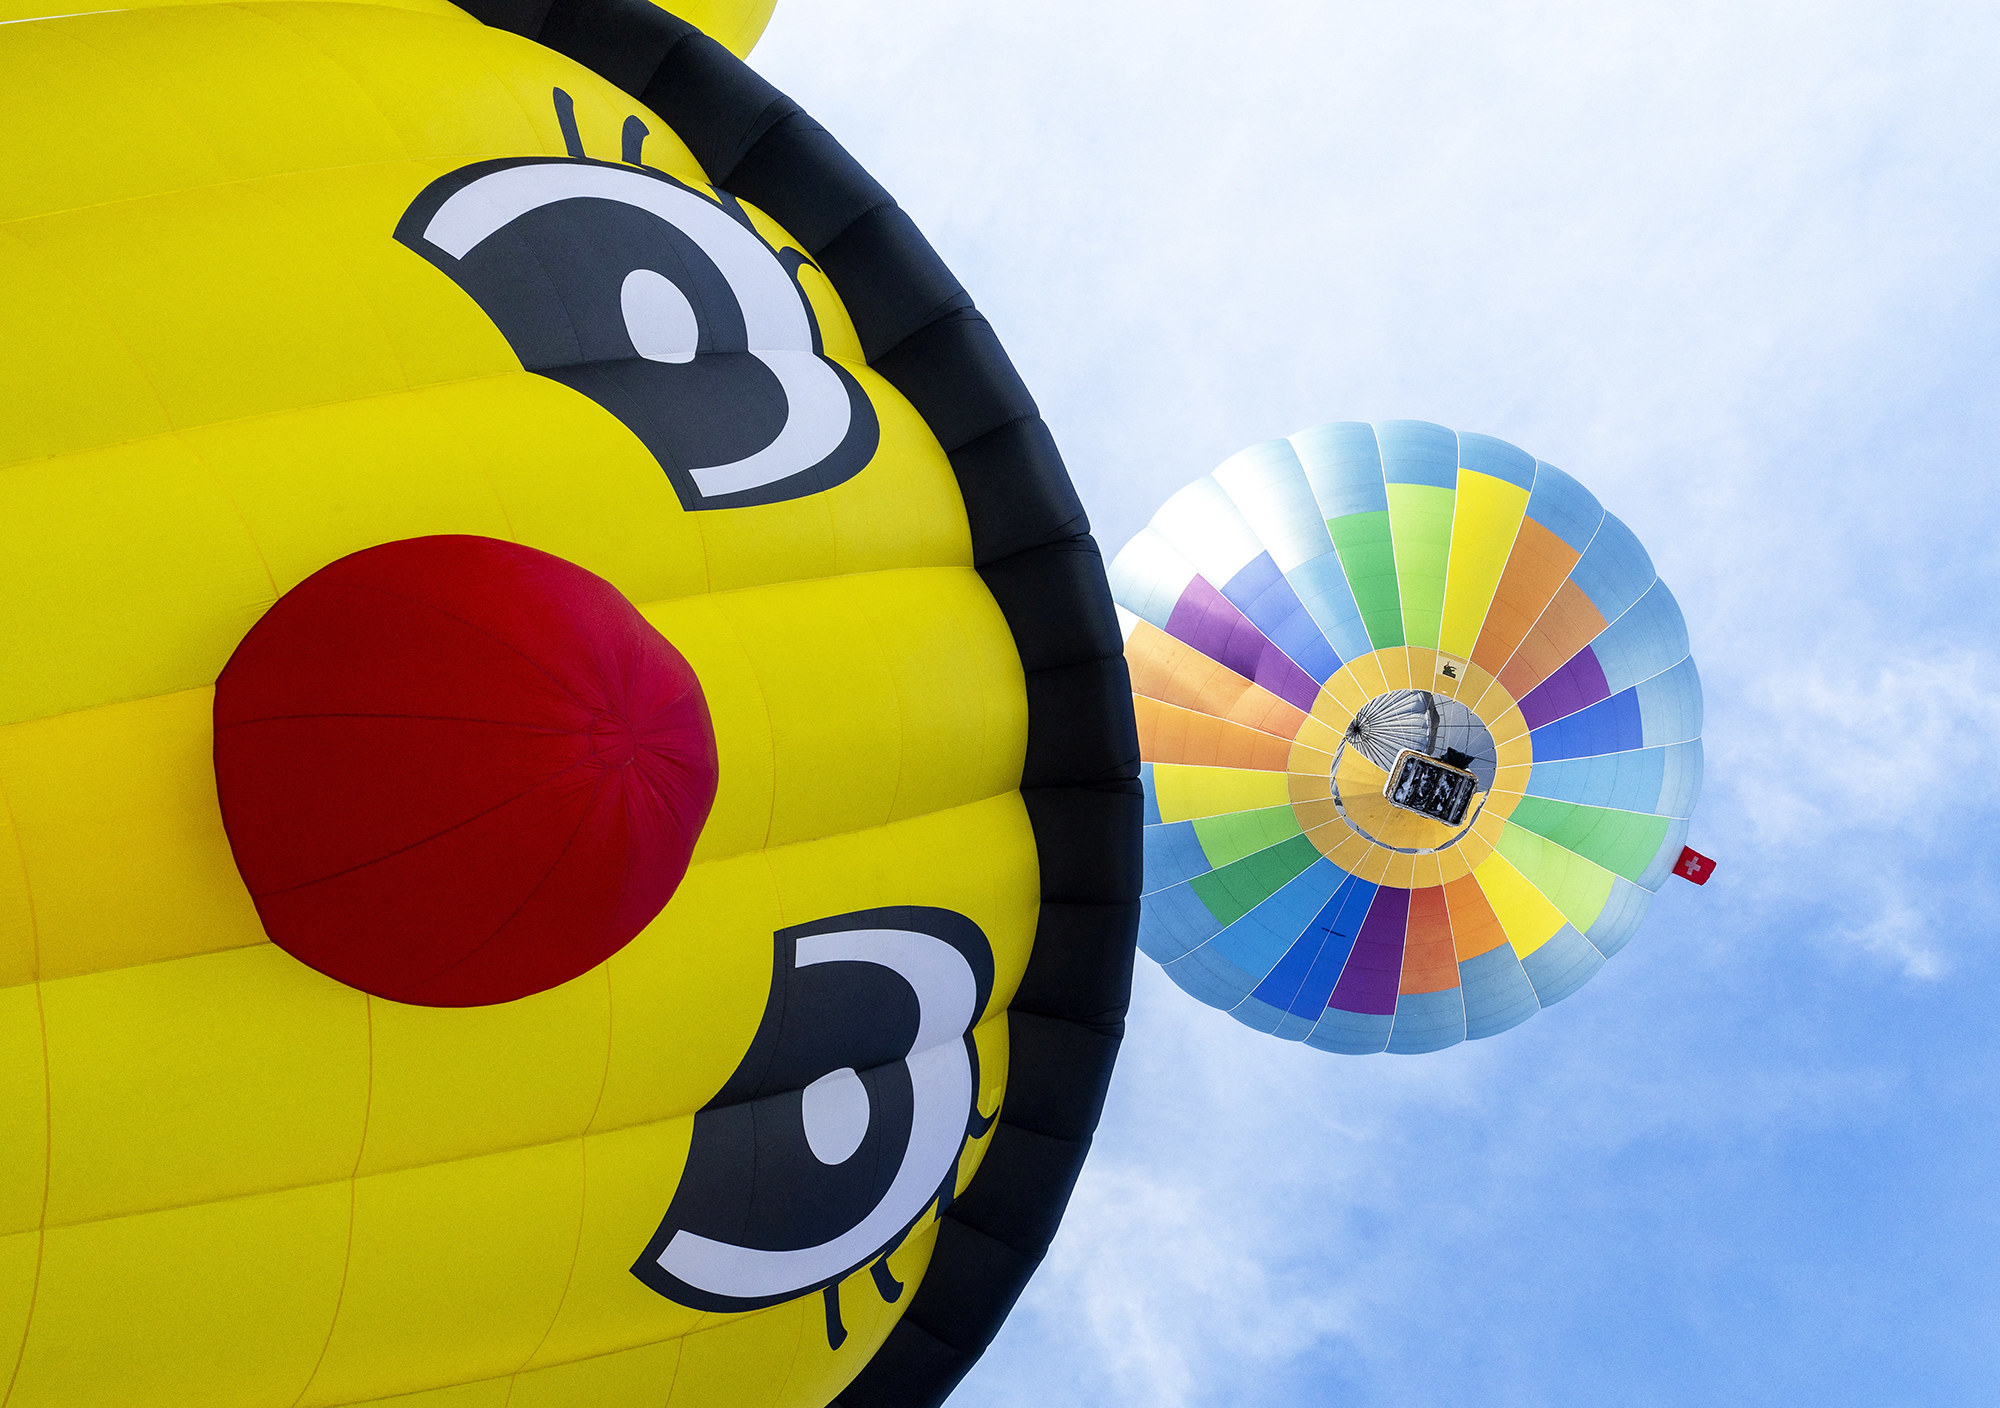 a gigantic bright yellow hot air balloon that looks like a red-nosed cartoon caterpillar